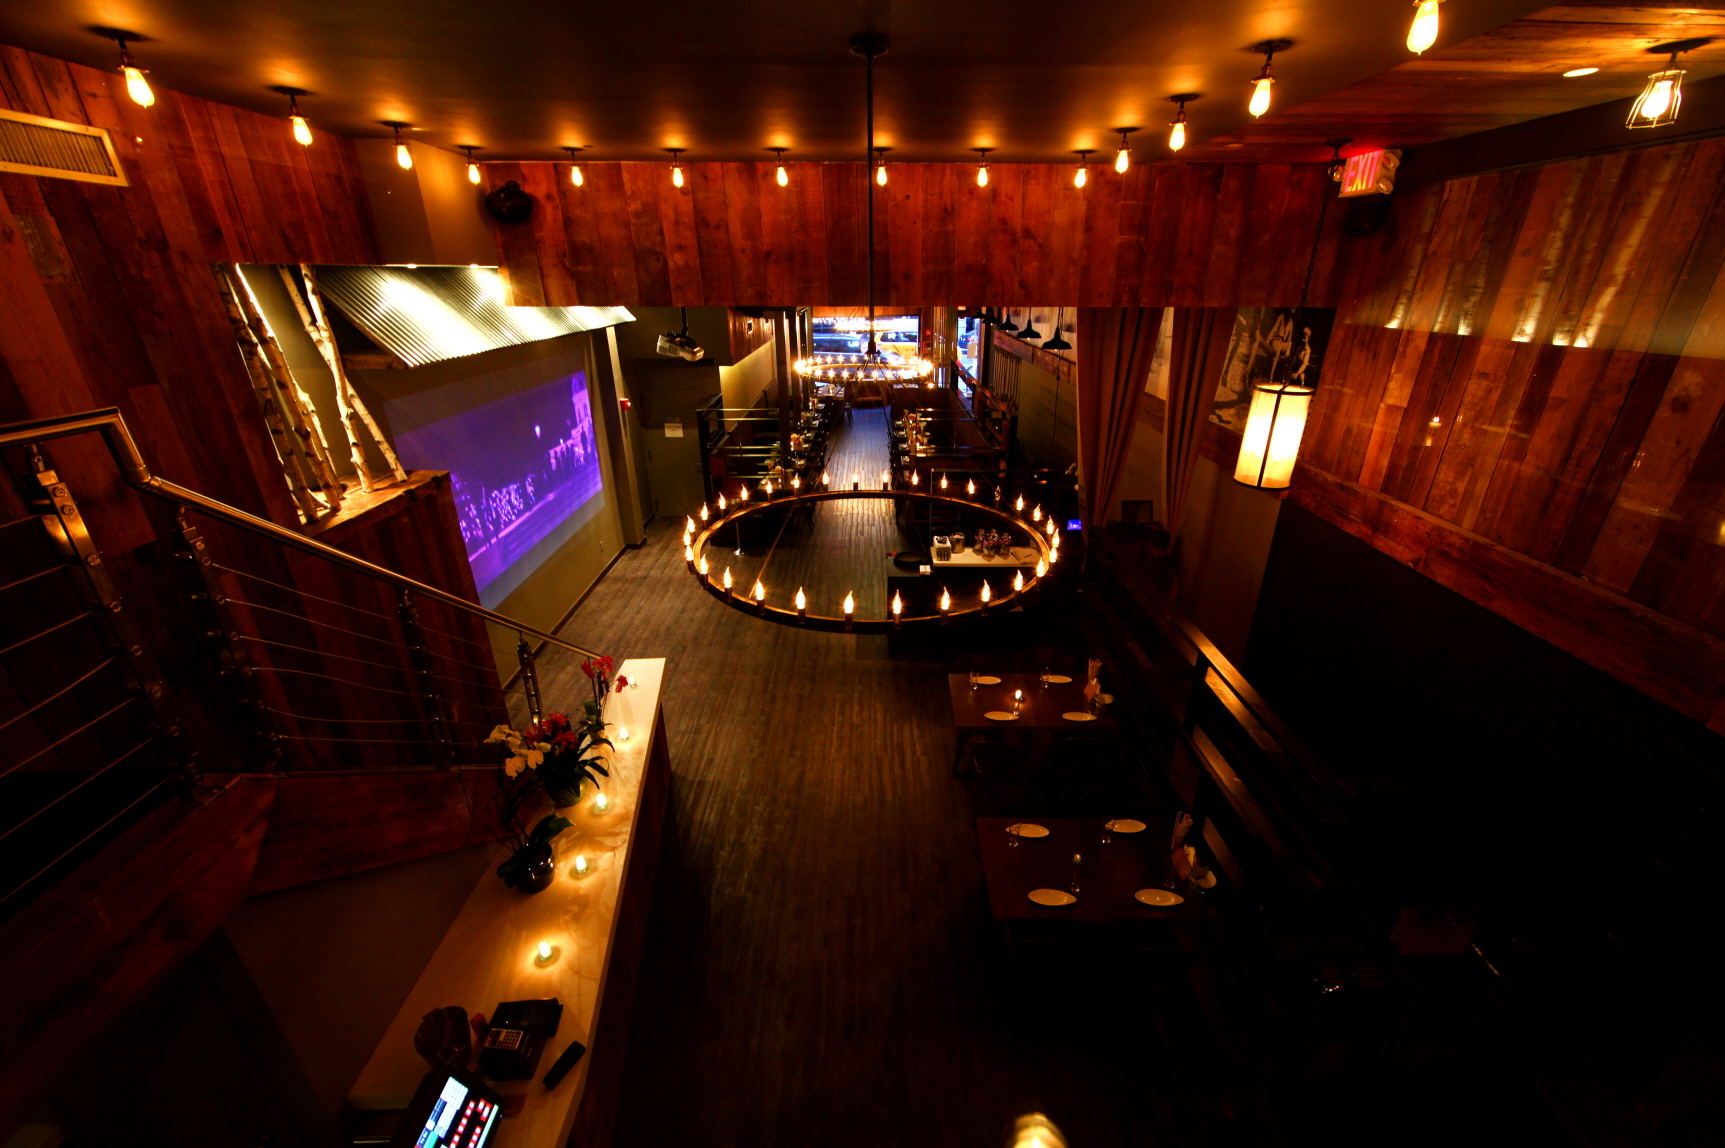 Barn Joo consists of a main restaurant floor, the upstairs Tal Room, and a lower level lounge called Under Verite